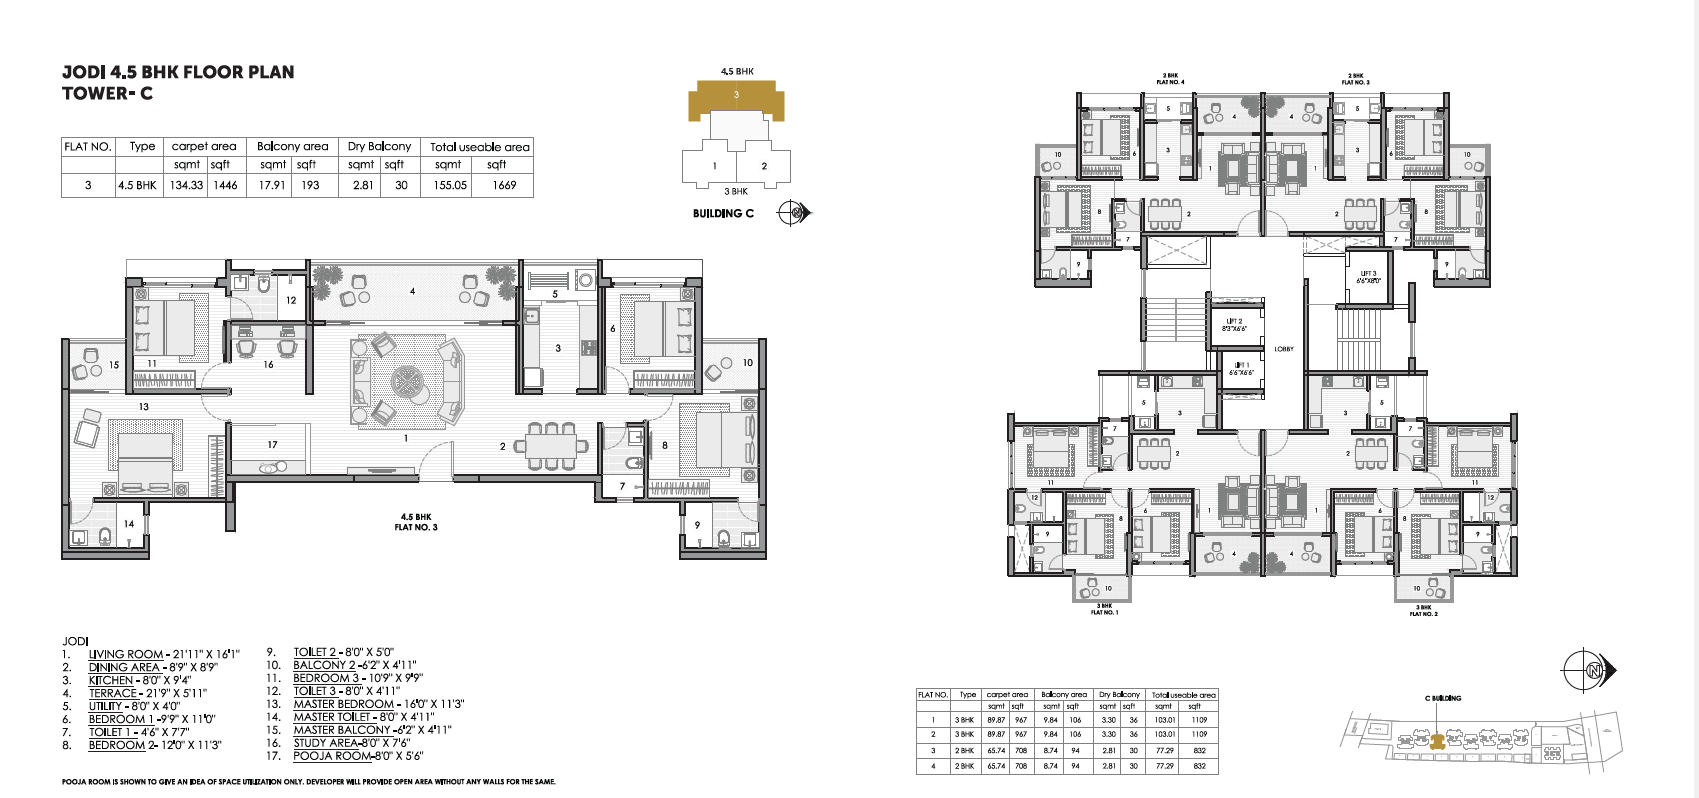 kunal the canary 4.5 bhk floor plan tower C